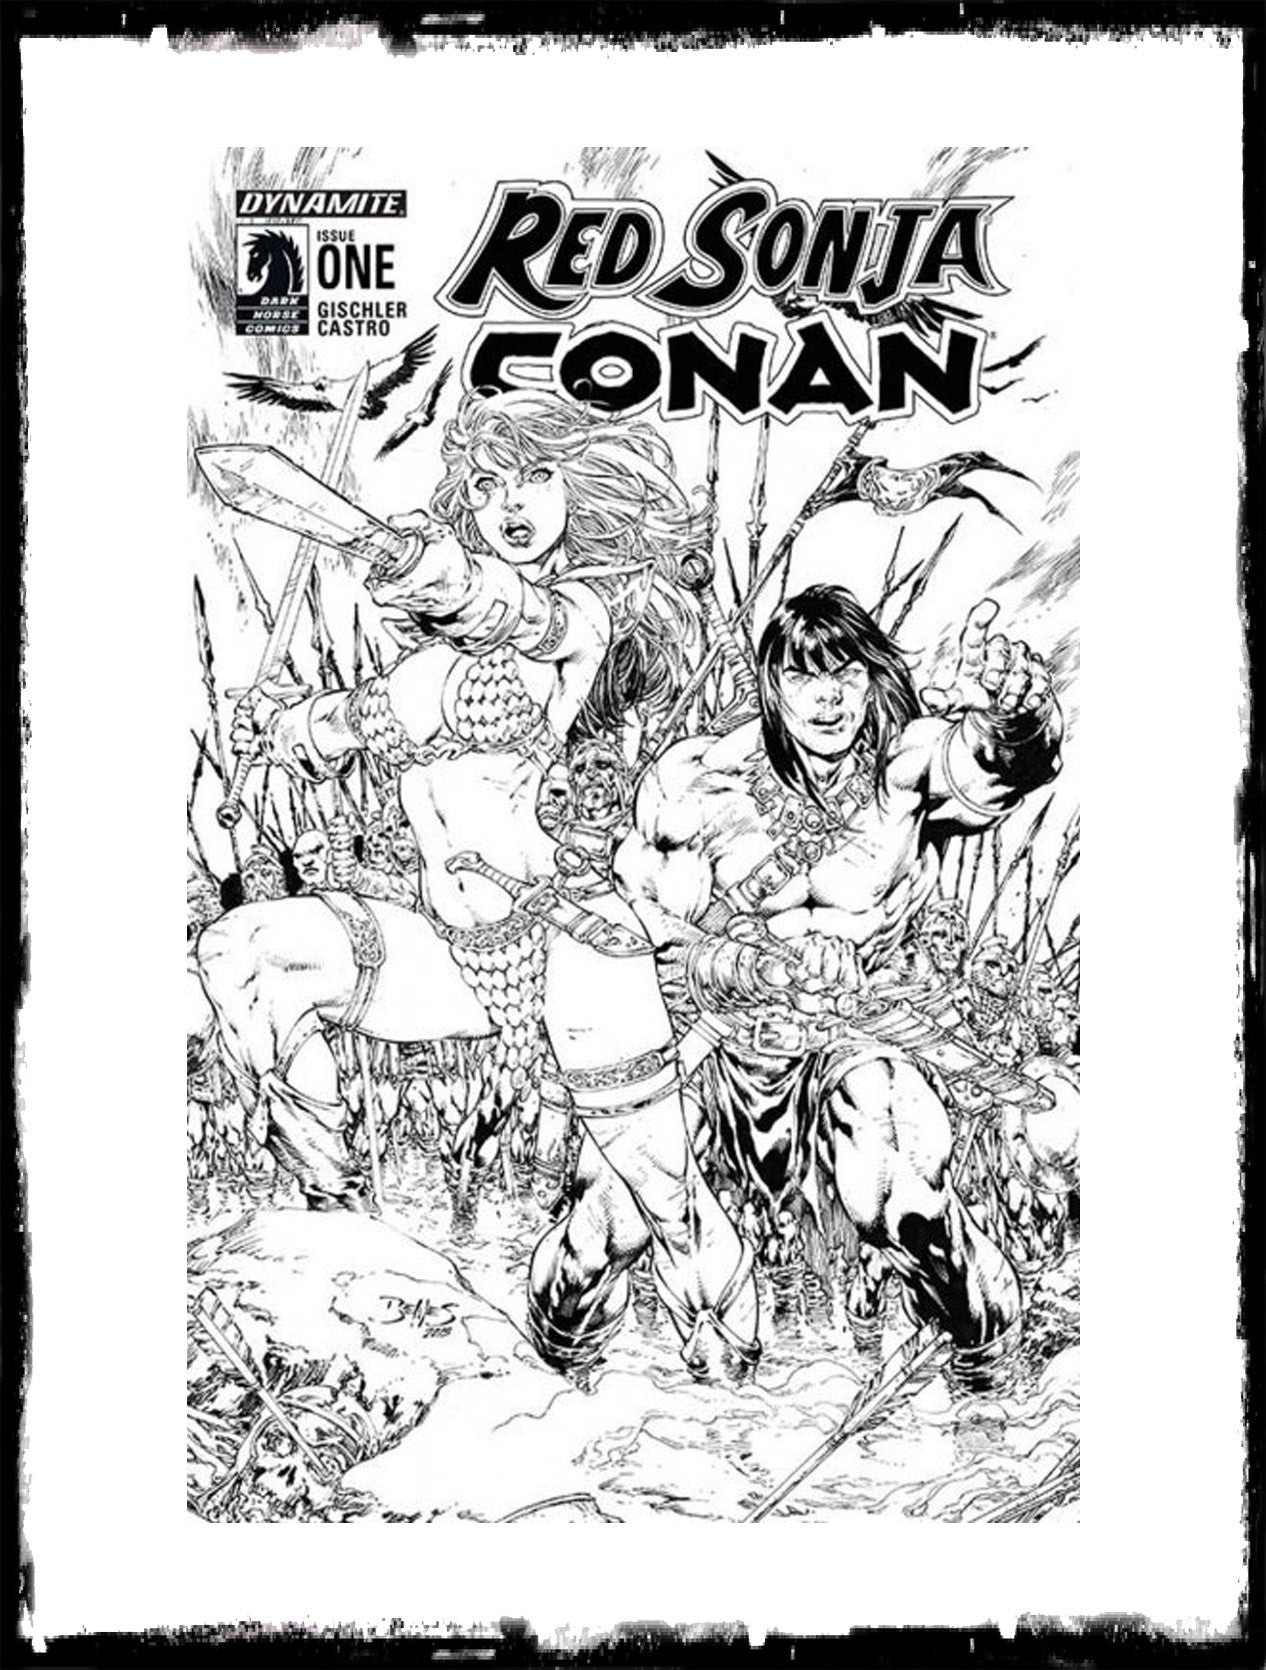 RED SONJA / CONAN - #1 ED BENES B&W VARIANT (2015 - CONDITION NM)